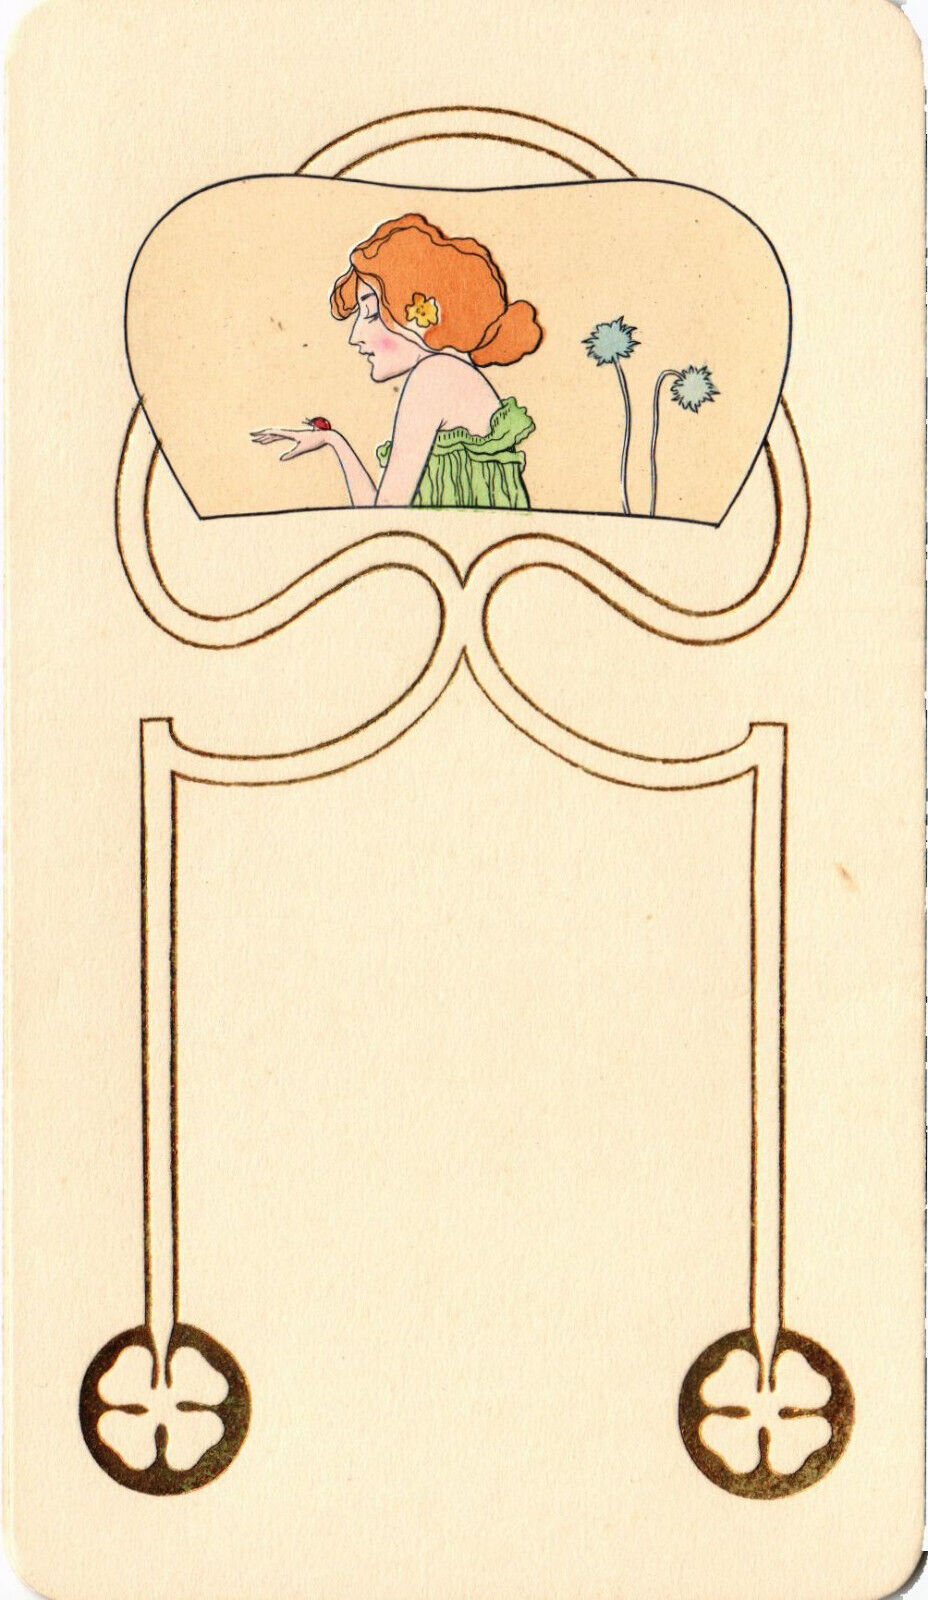 PC KIRCHNER, GIRLS IN FRAMES WITH LEAVES, ART NOUVEAU, MENU CARD H 6-1 (b48514)